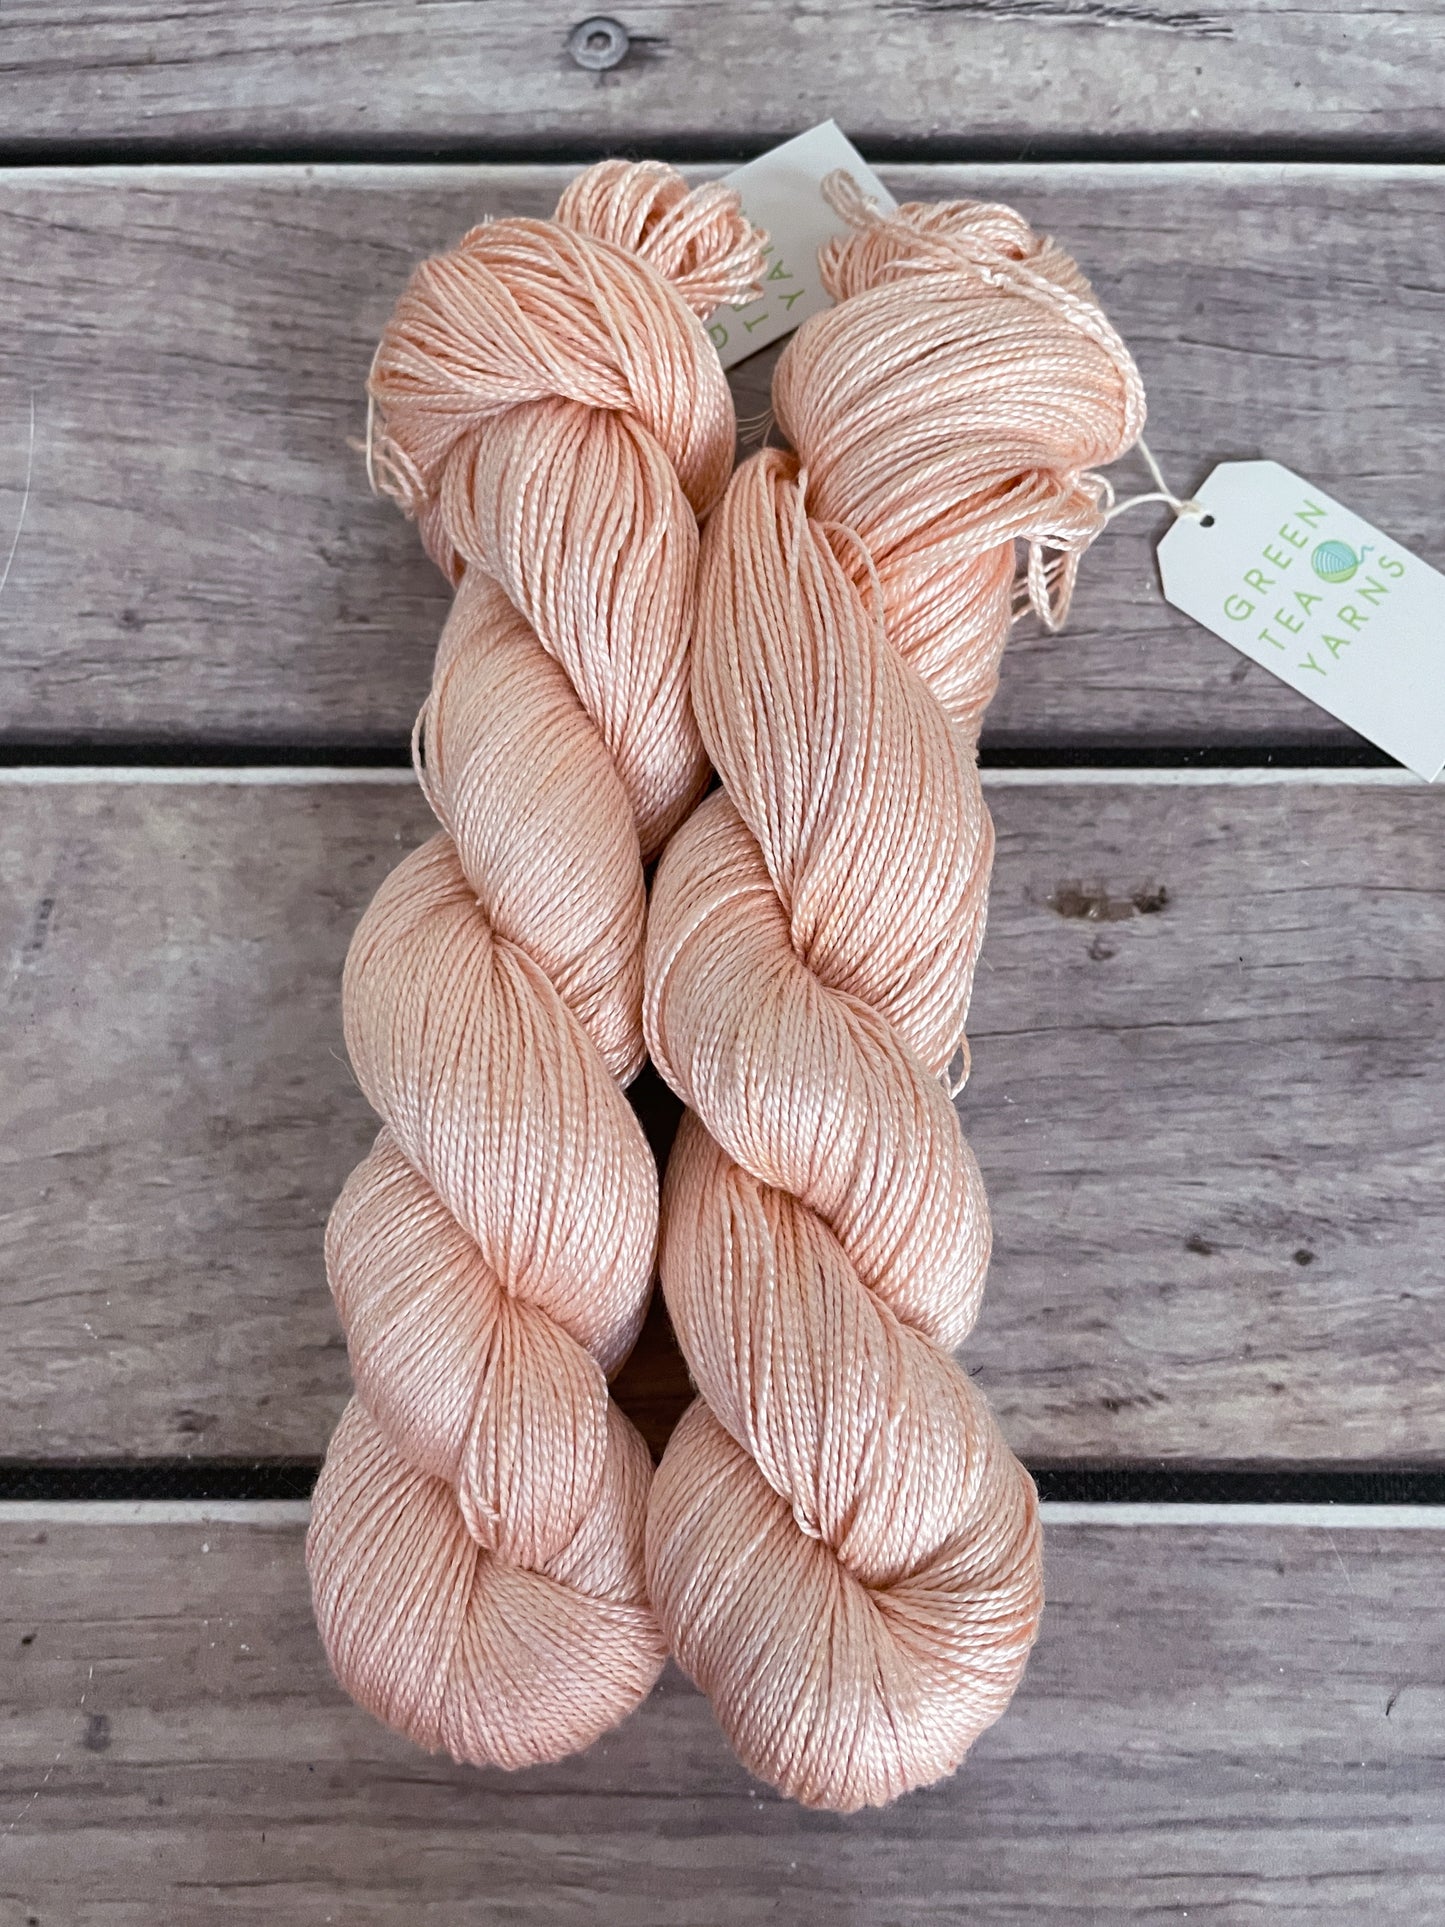 She Sells Seashells - 4 ply in Mulberry silk - Ginseng